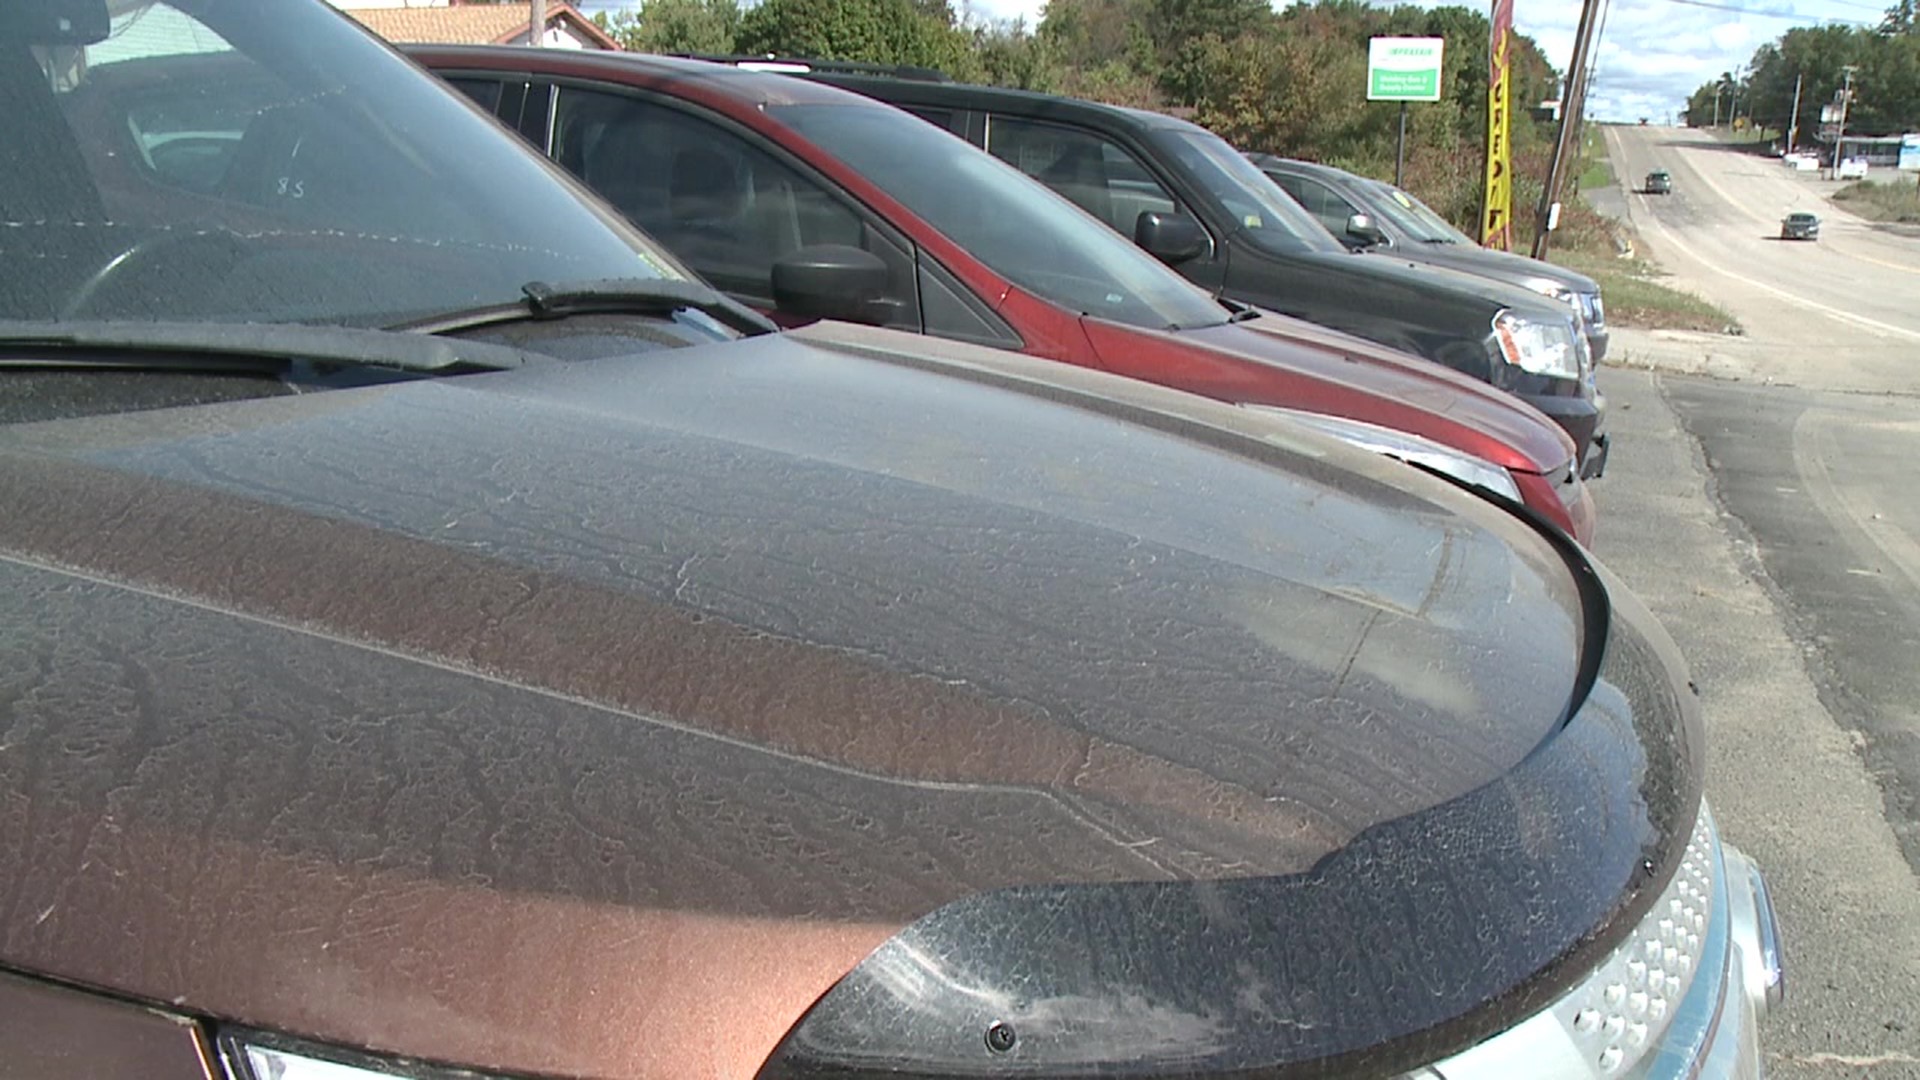 Two used car businesses say a neighboring construction project is hurting their business.